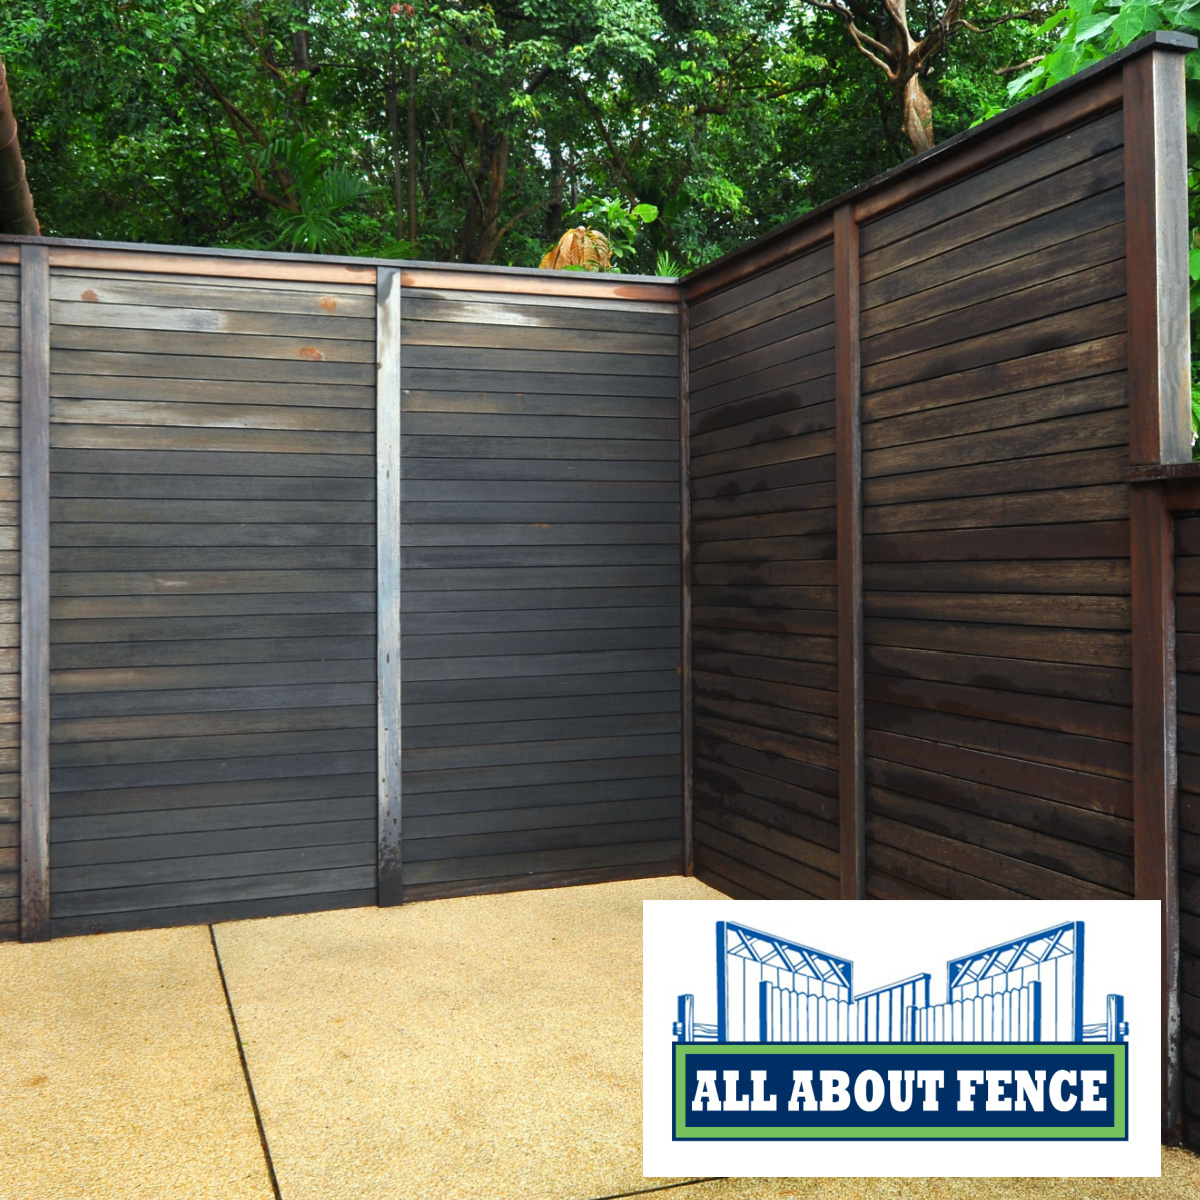 Skilled Wood Fence Repair Is Always The Best Choice